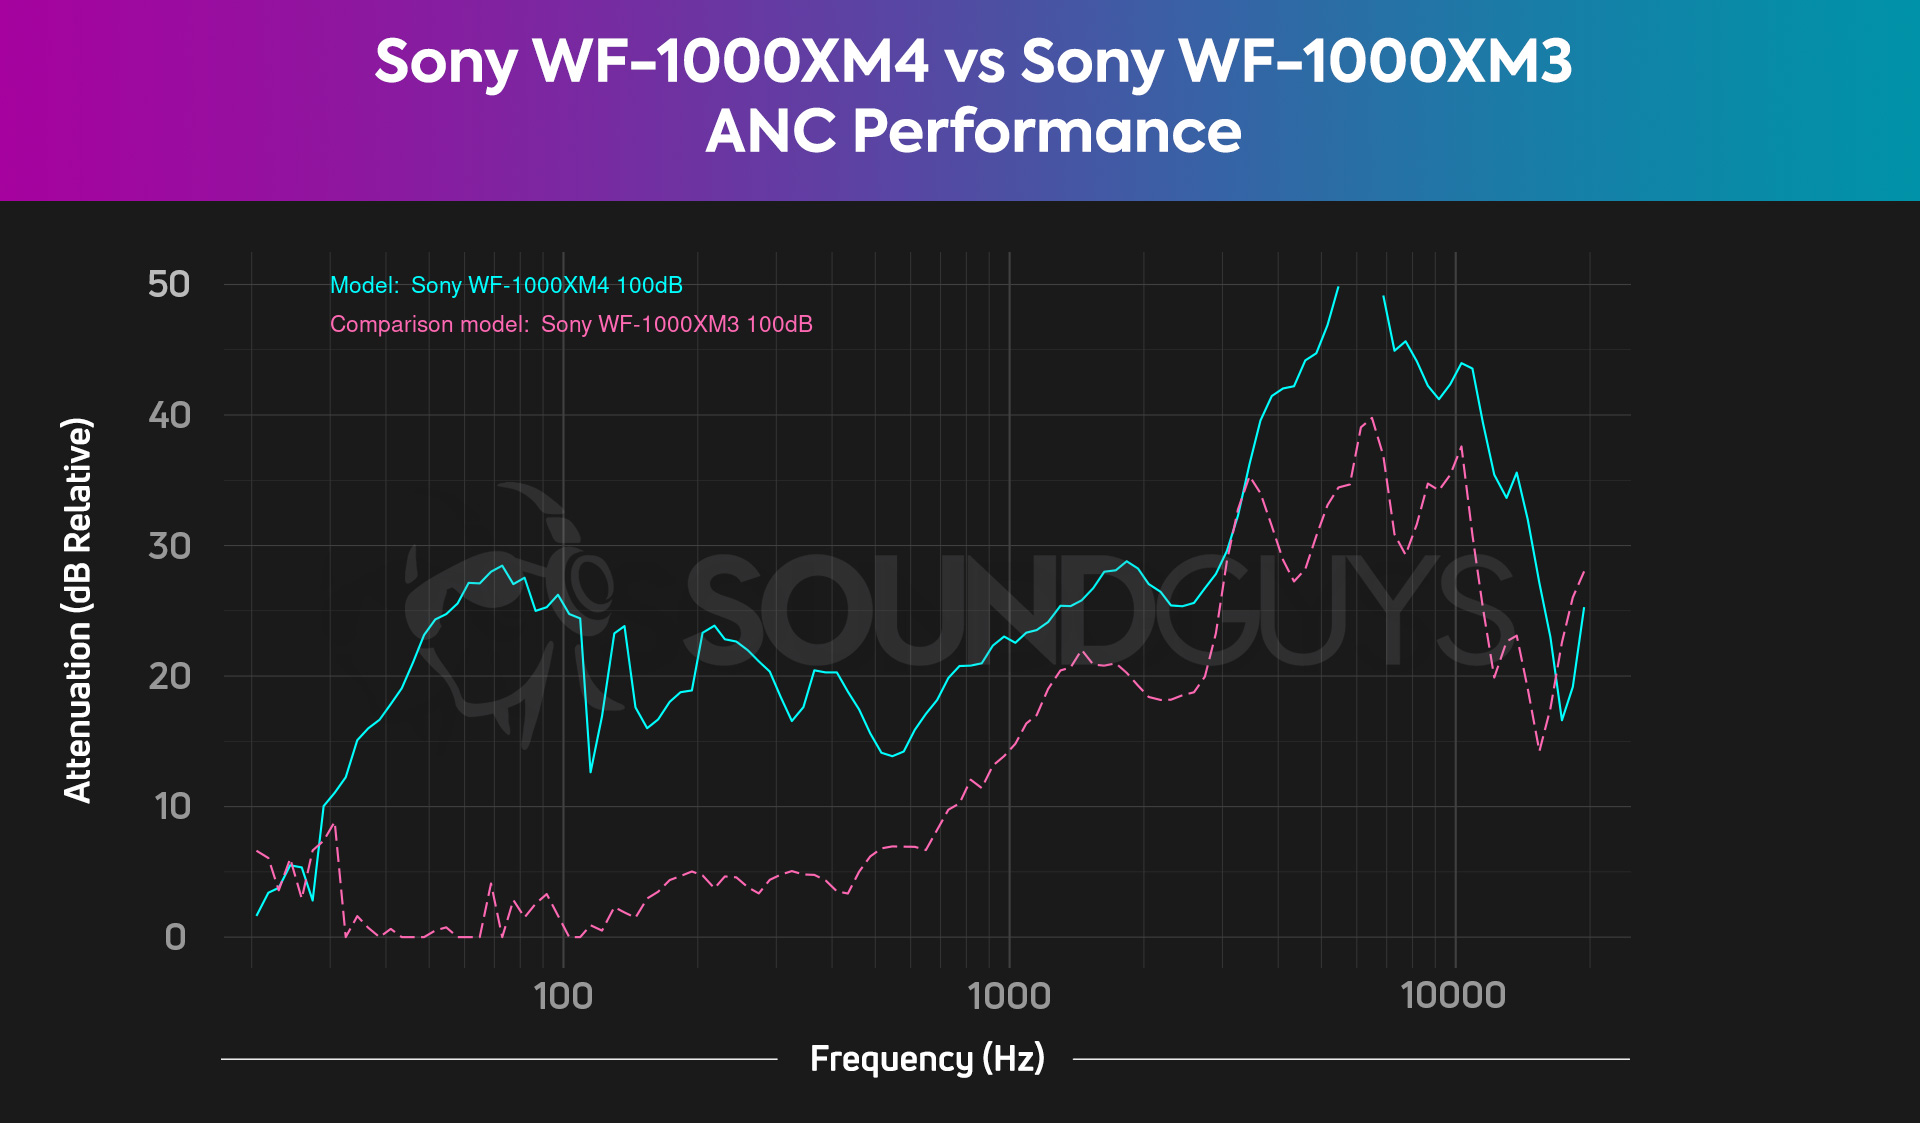 A chart compares the Sony WF-1000XM4 and WF-1000XM3 noise canceling performance, revealing the WF-1000XM4 to be much more effective across the board.